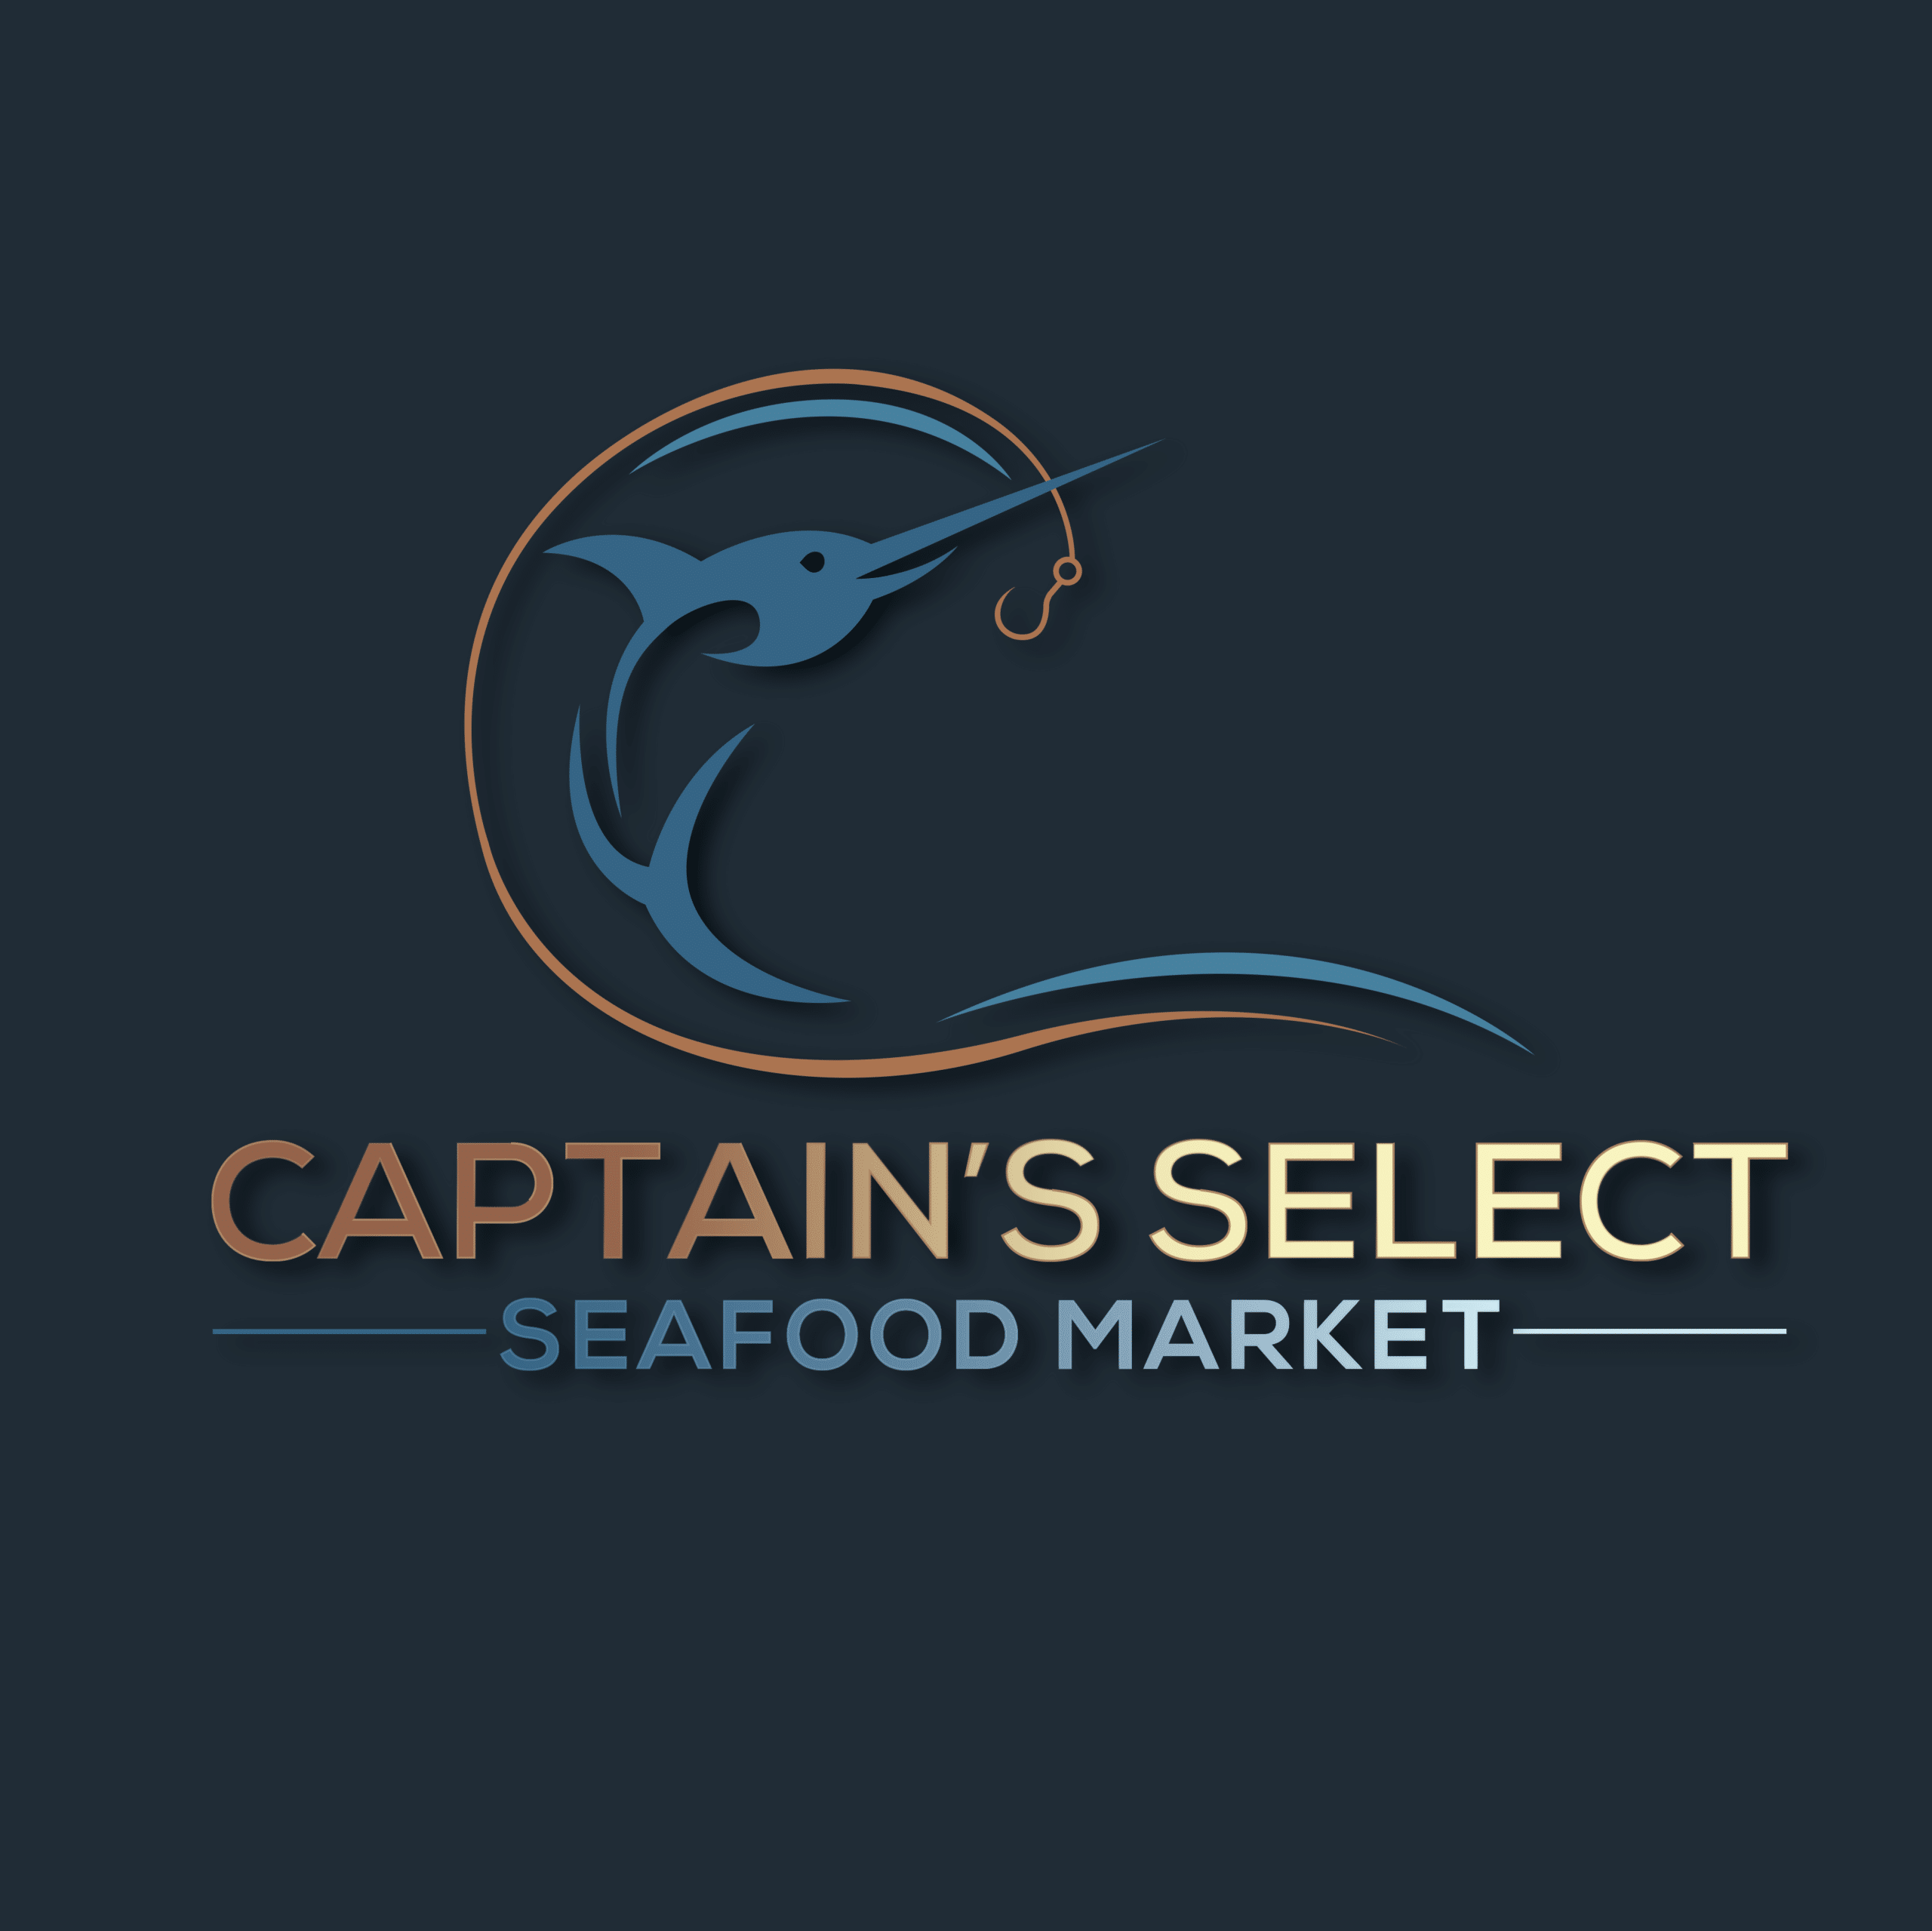 Logo of Captain's Select Seafood Market